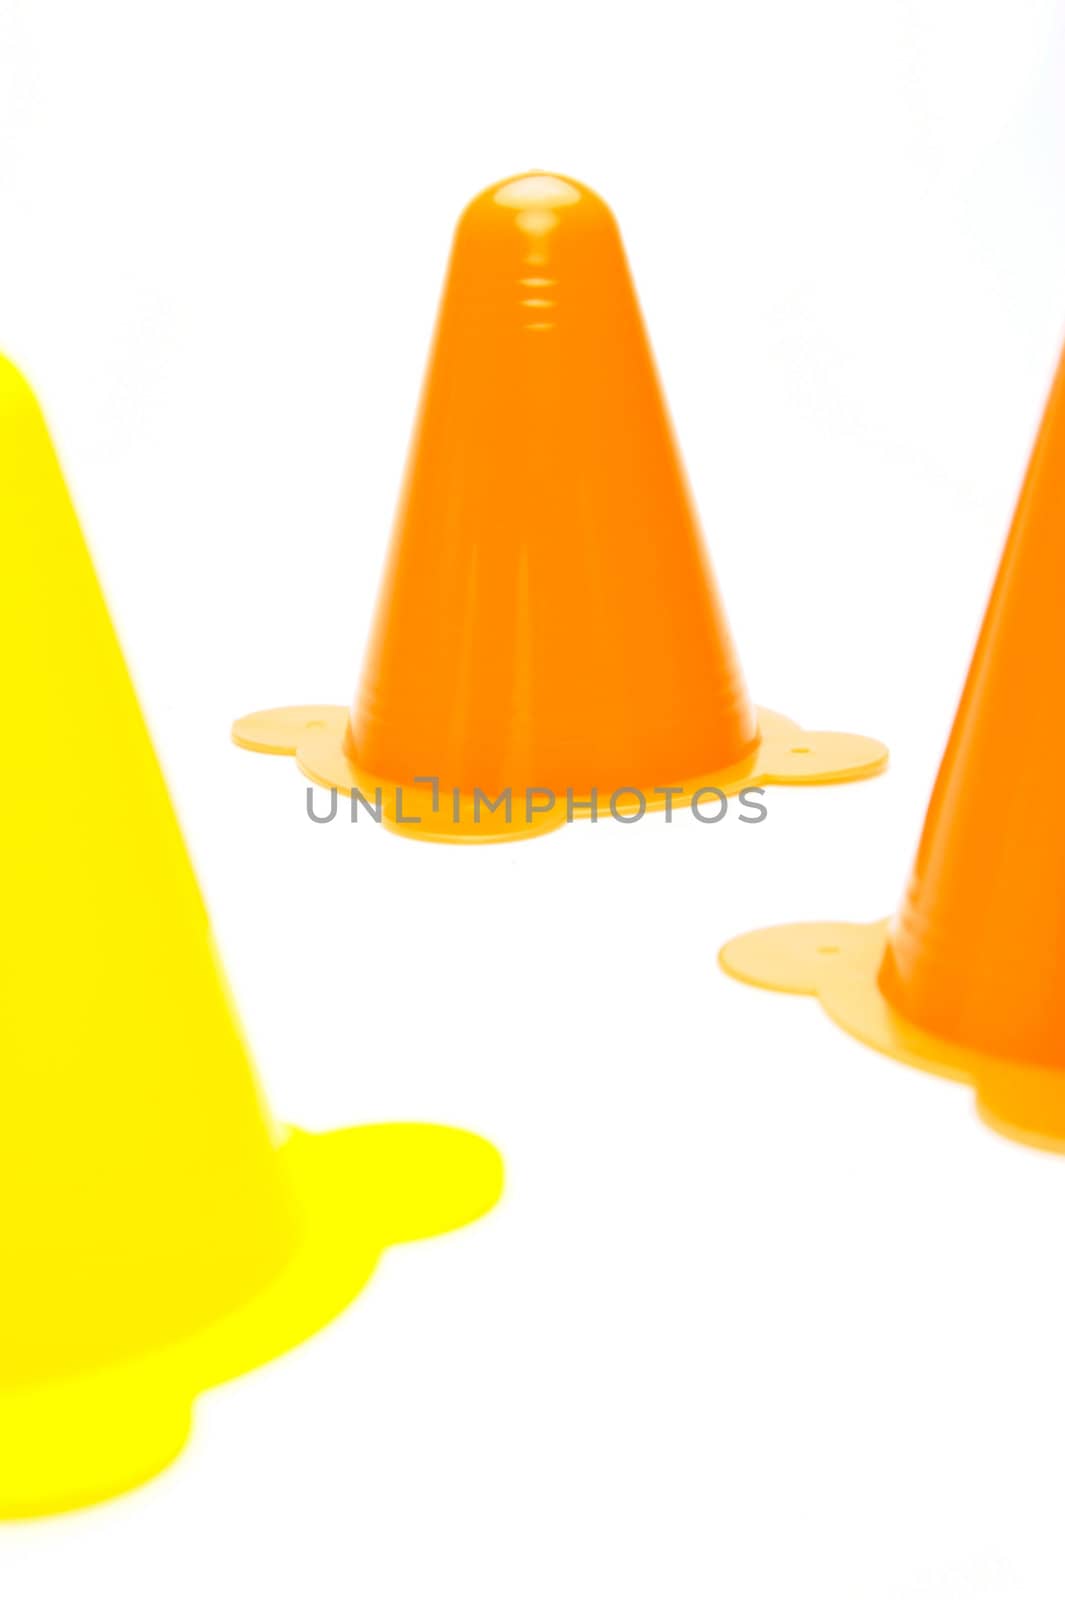 Witches hats isolated against a white background